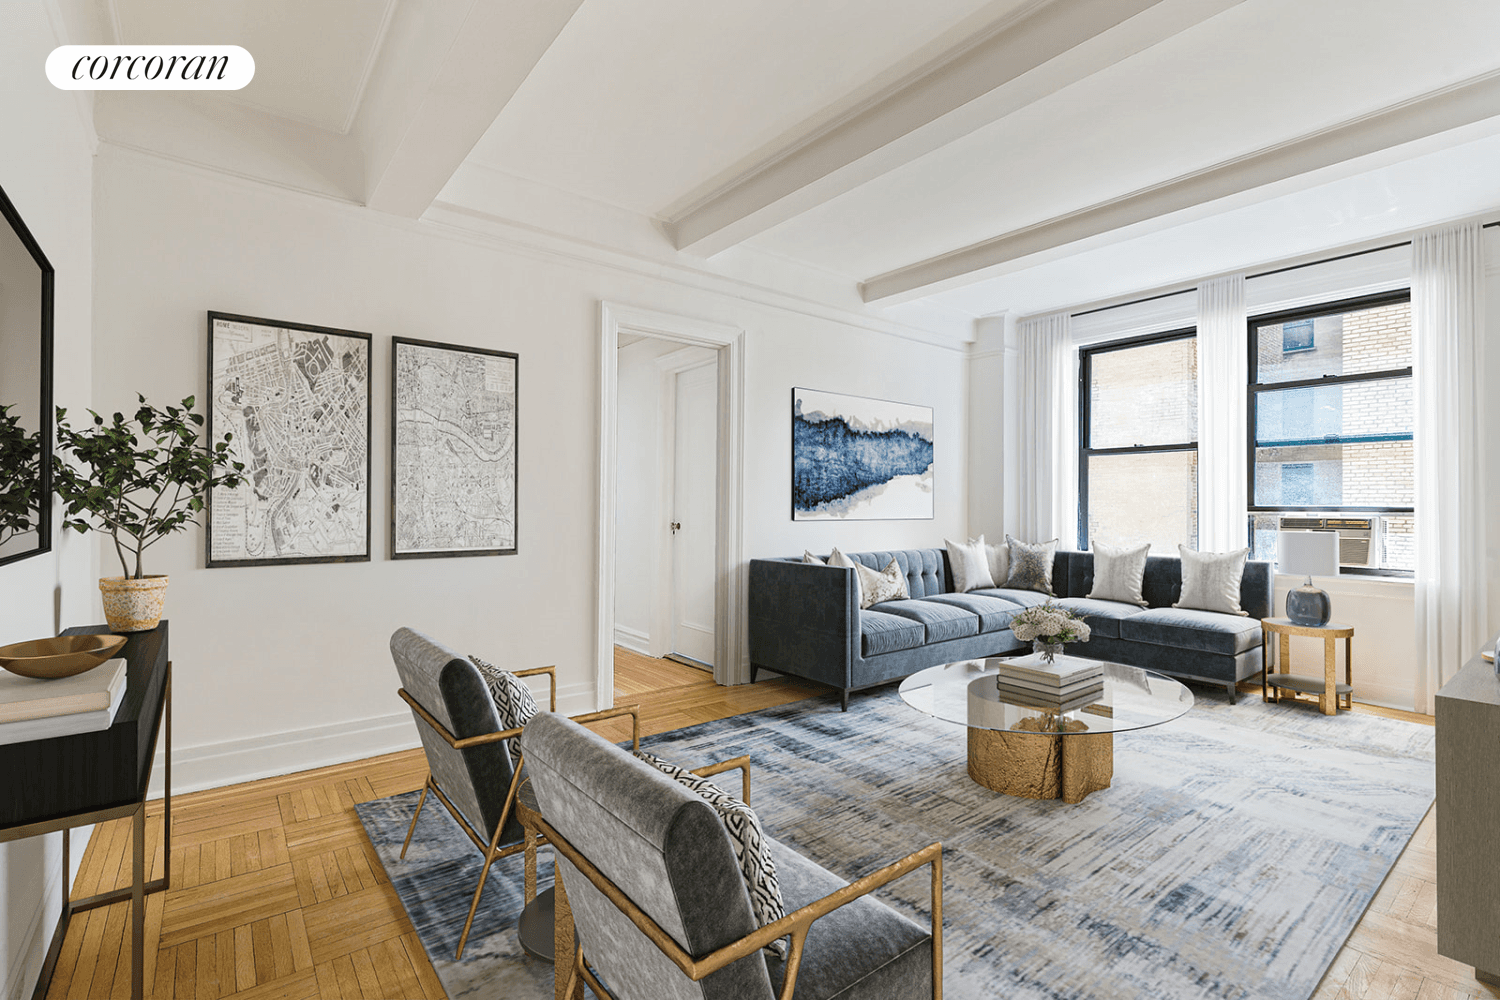 Apartment 6D is a spacious prewar one bedroom apartment in the heart of Carnegie Hill.